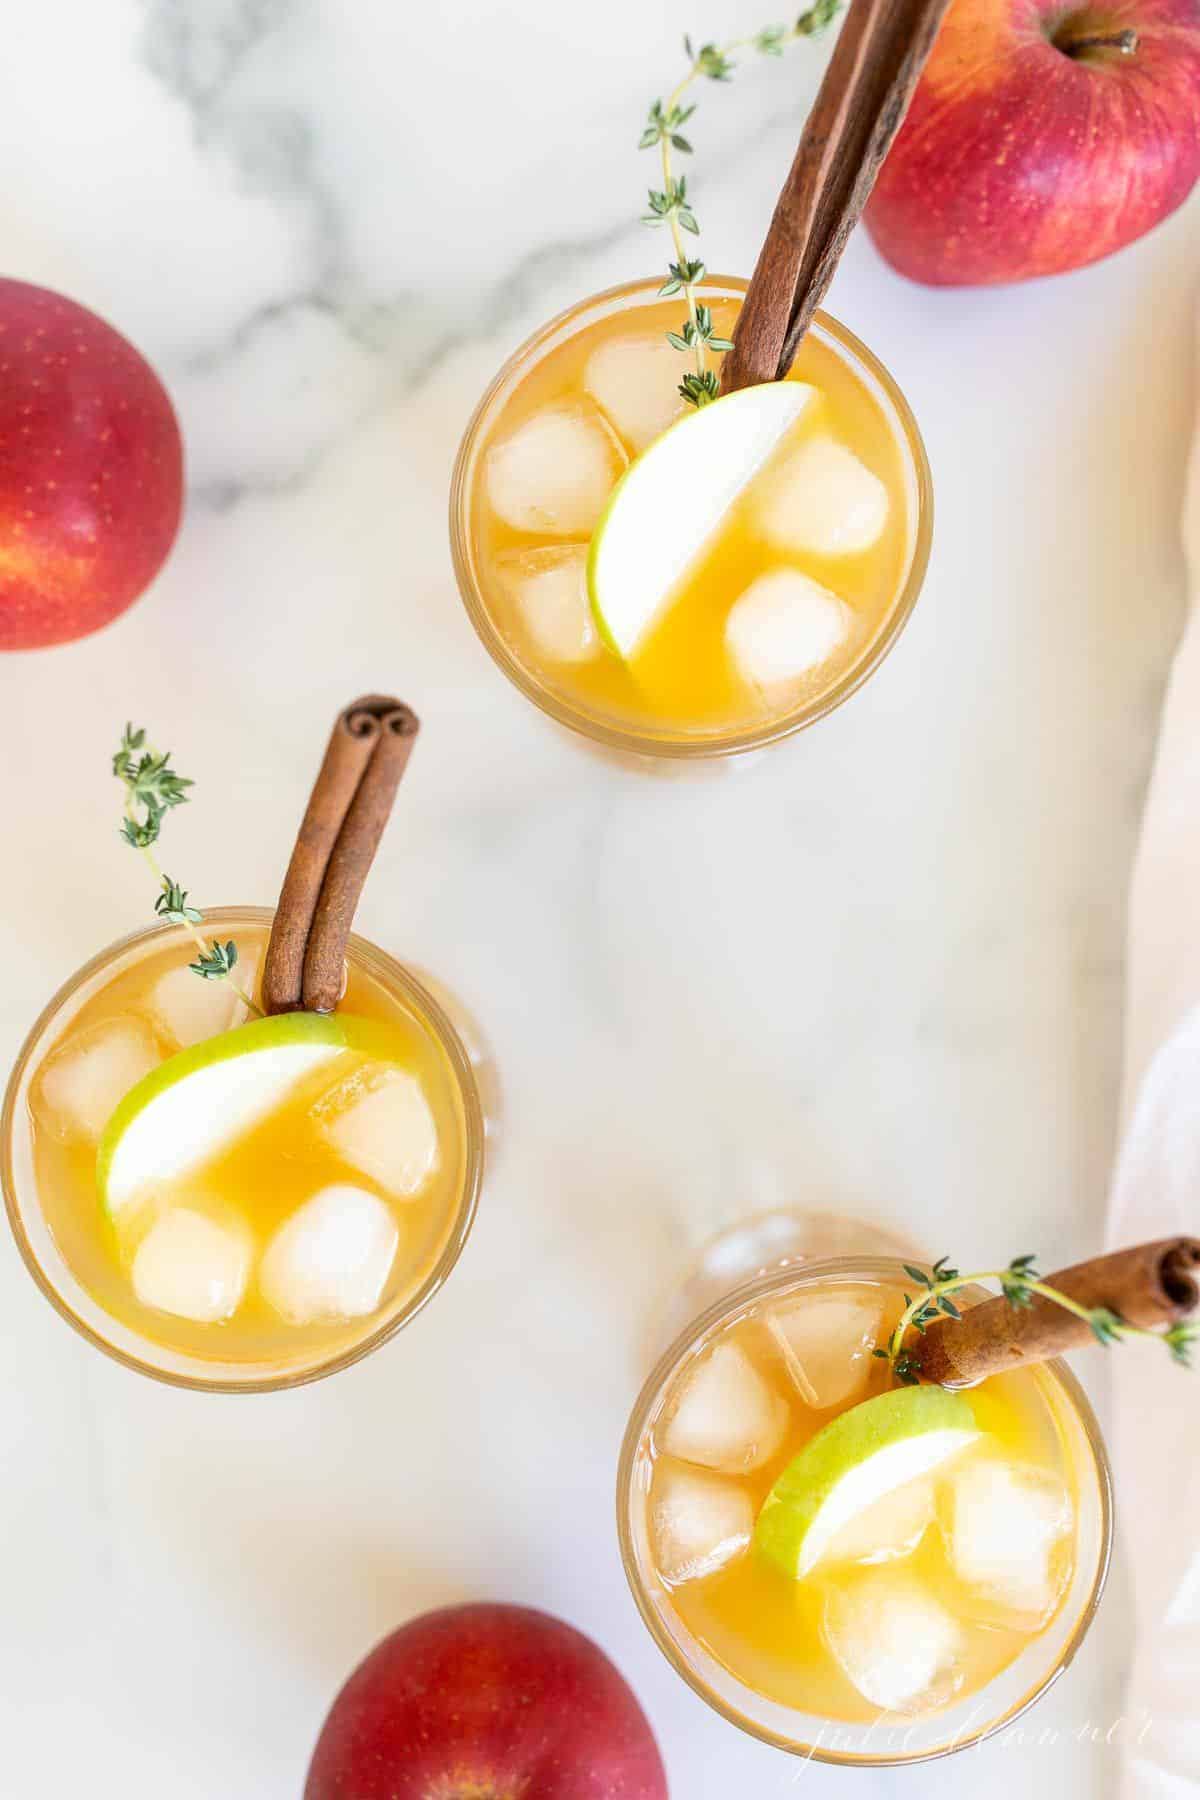 Cocktail glasses filled with an apple cider cocktail on ice, garnished with thyme, cinnamon stick and apple slice, apples to the side.